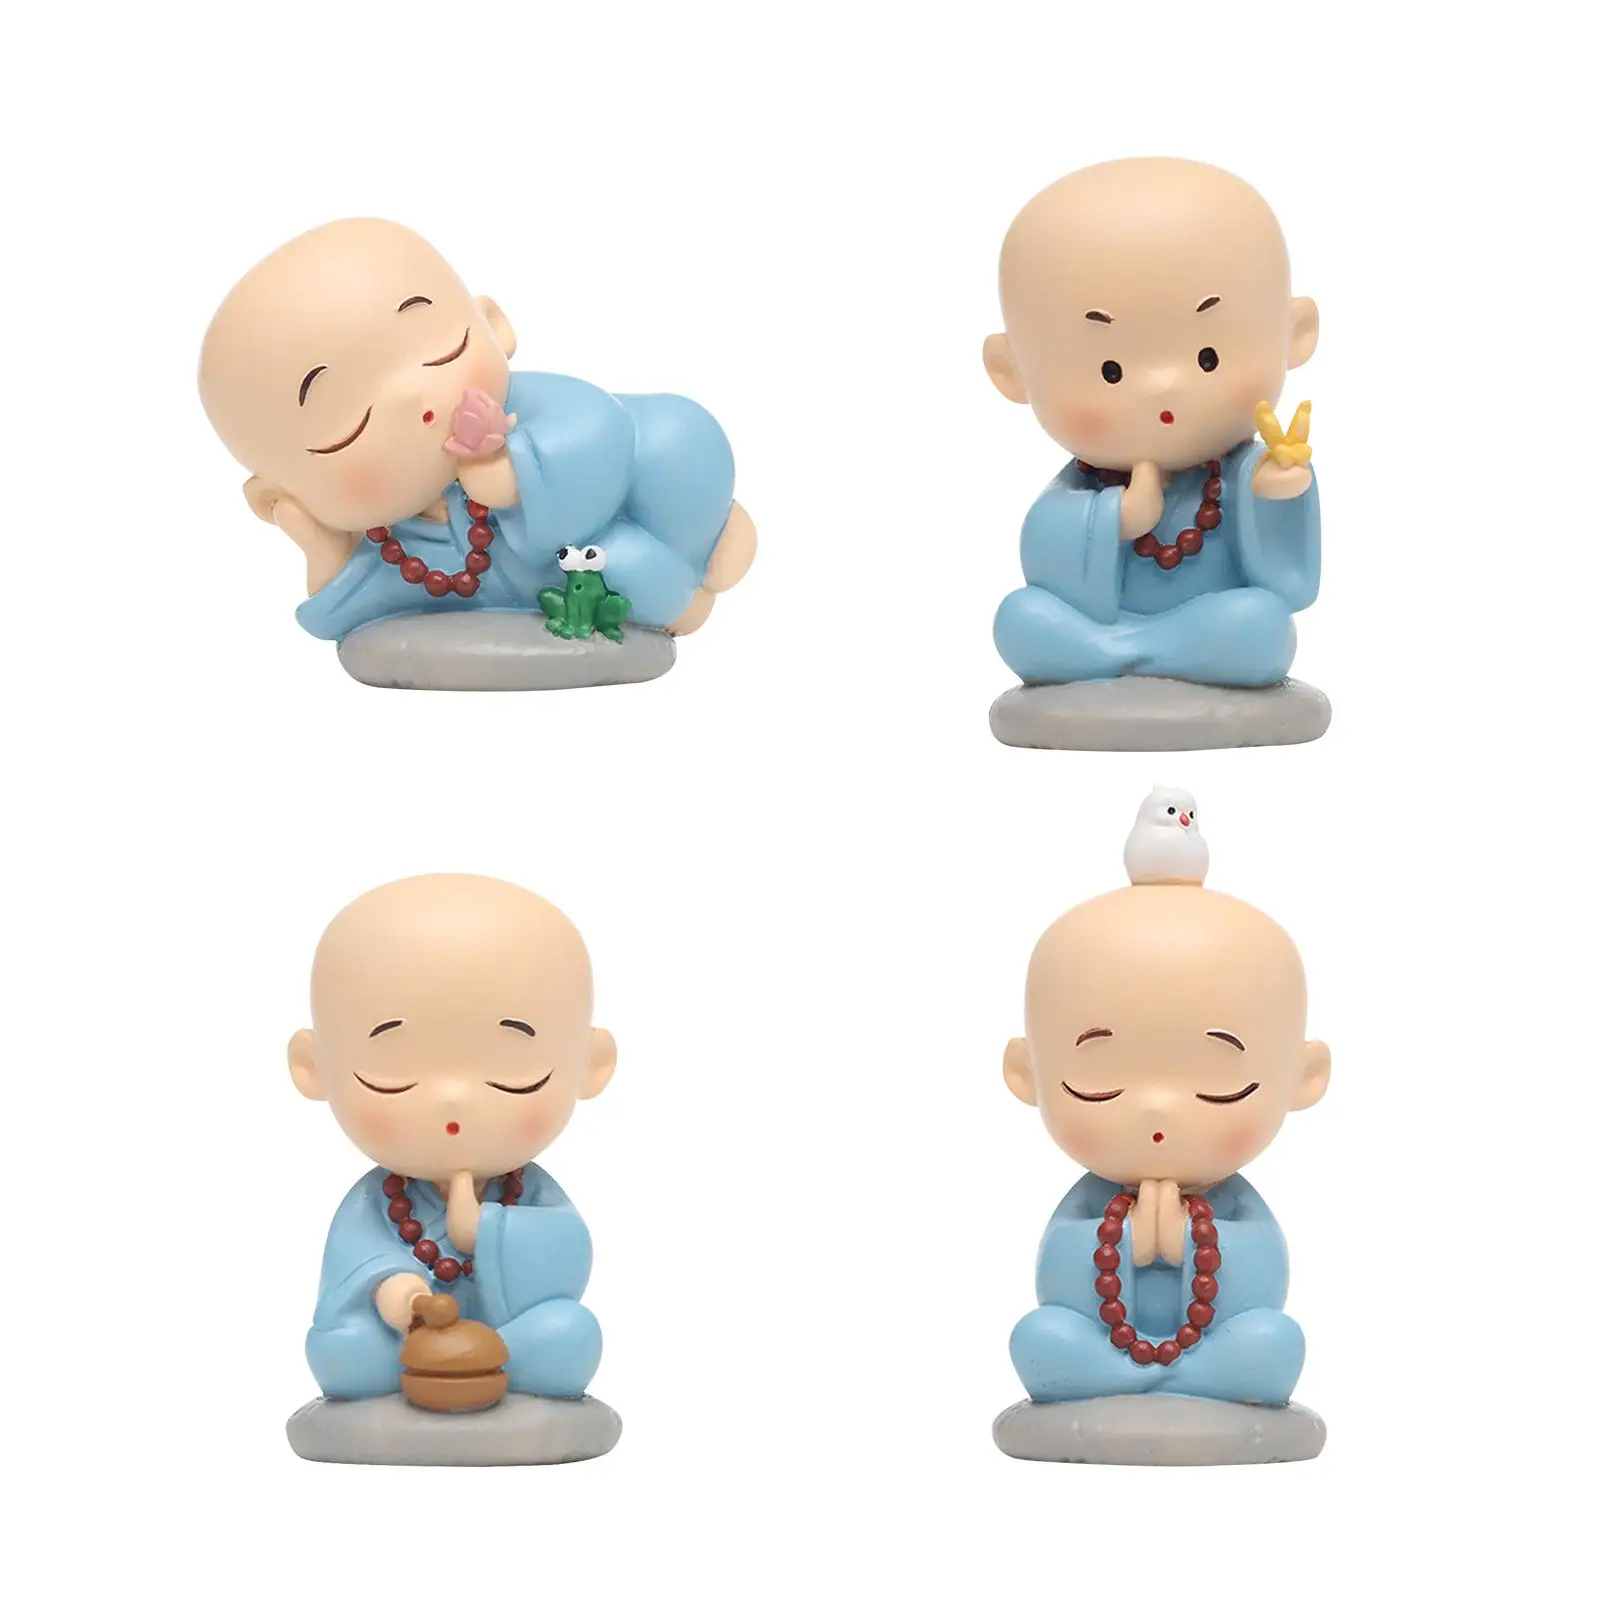 Little monks Car Ornament Craft Creative Cute Resin Statue New Chinese style Accessories Decorative for Desktop Home Table